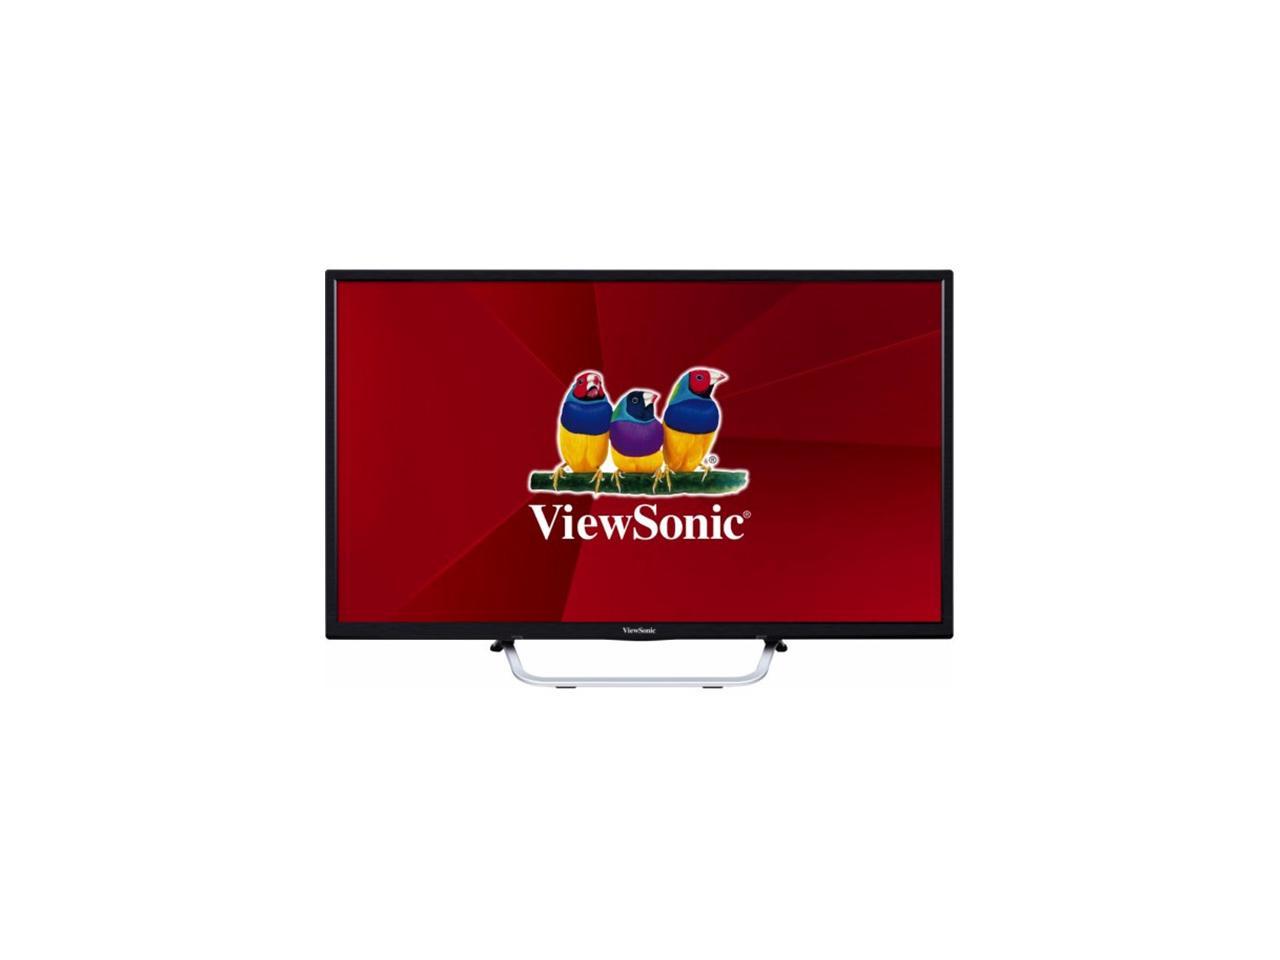 ViewSonic CDE3205 32" 1080P Commercial LED Display with USB Media Player, 16/7 Operation Rating RS232, HDMI, DVI, VGA